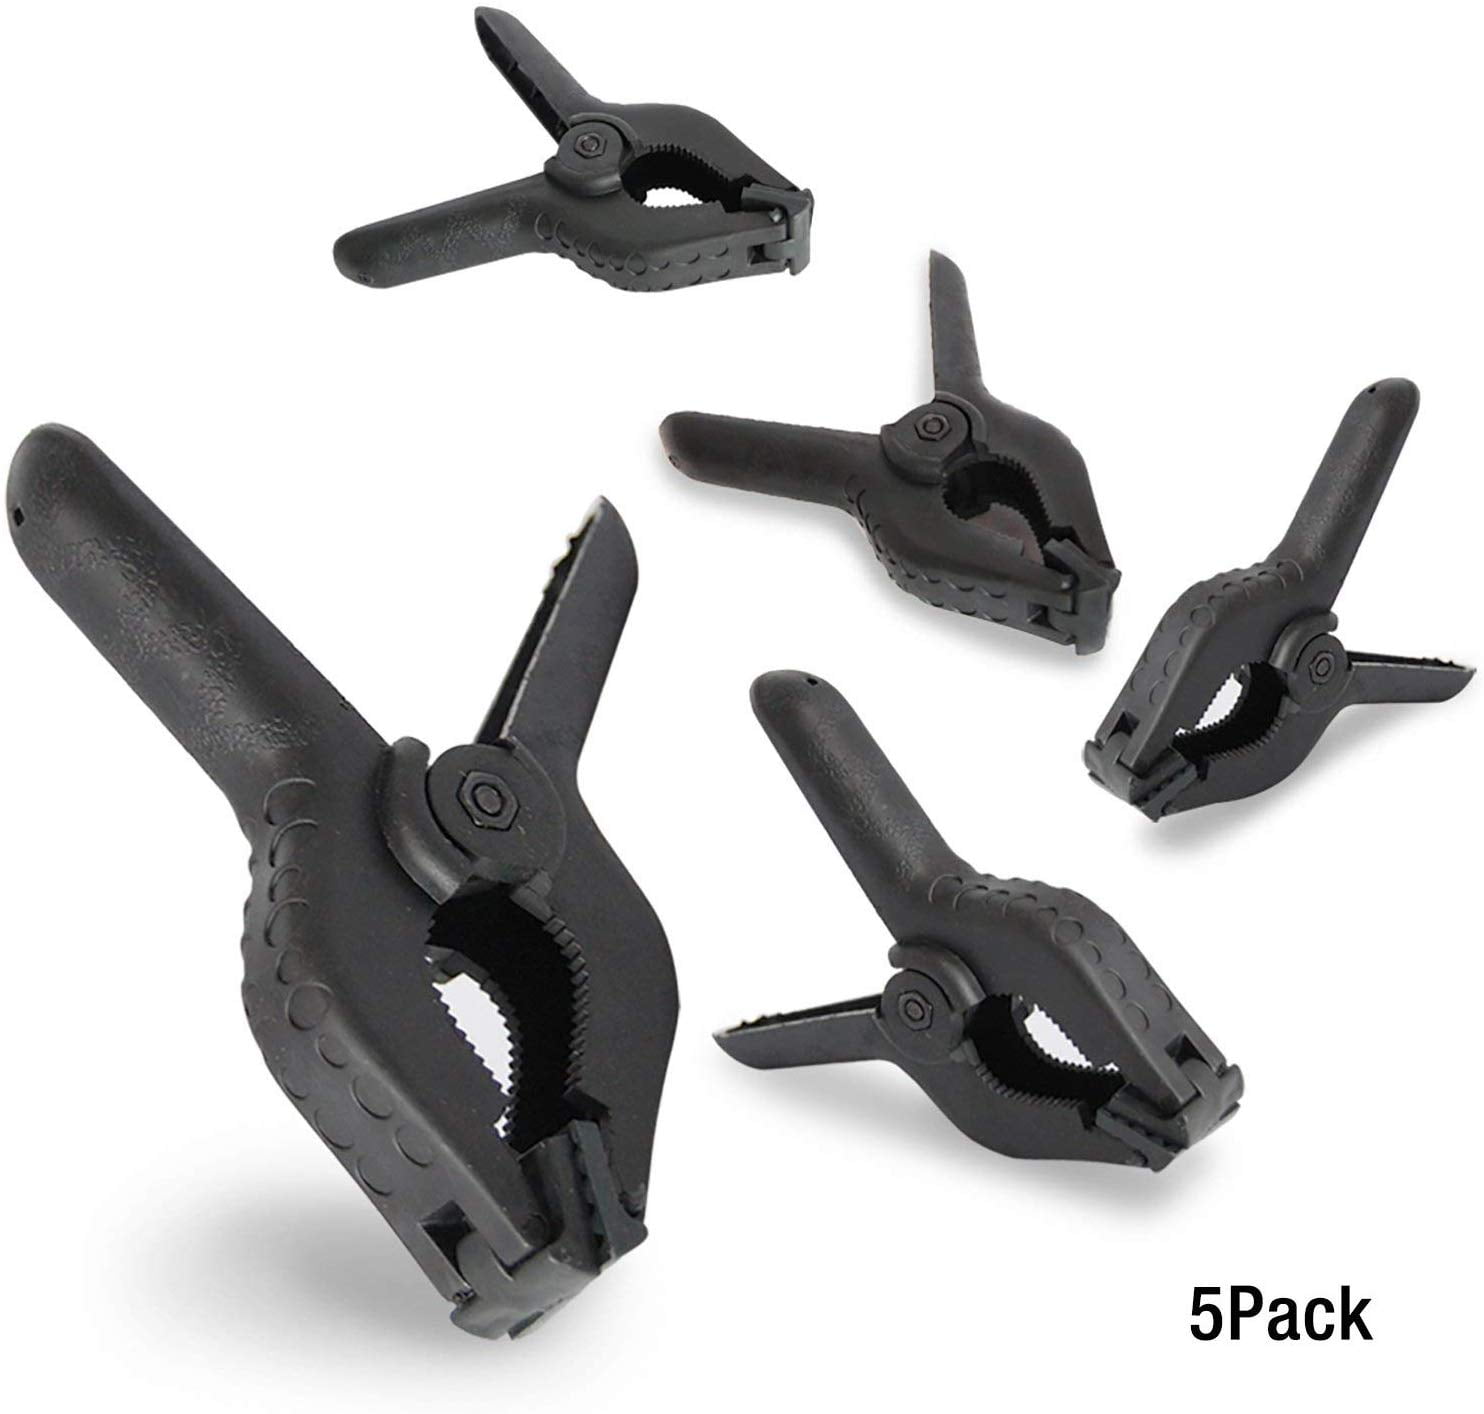 6 X 6" Metal Spring Clamps Market Stall Heavy Duty Tarpaulin Clip High Quality for sale online